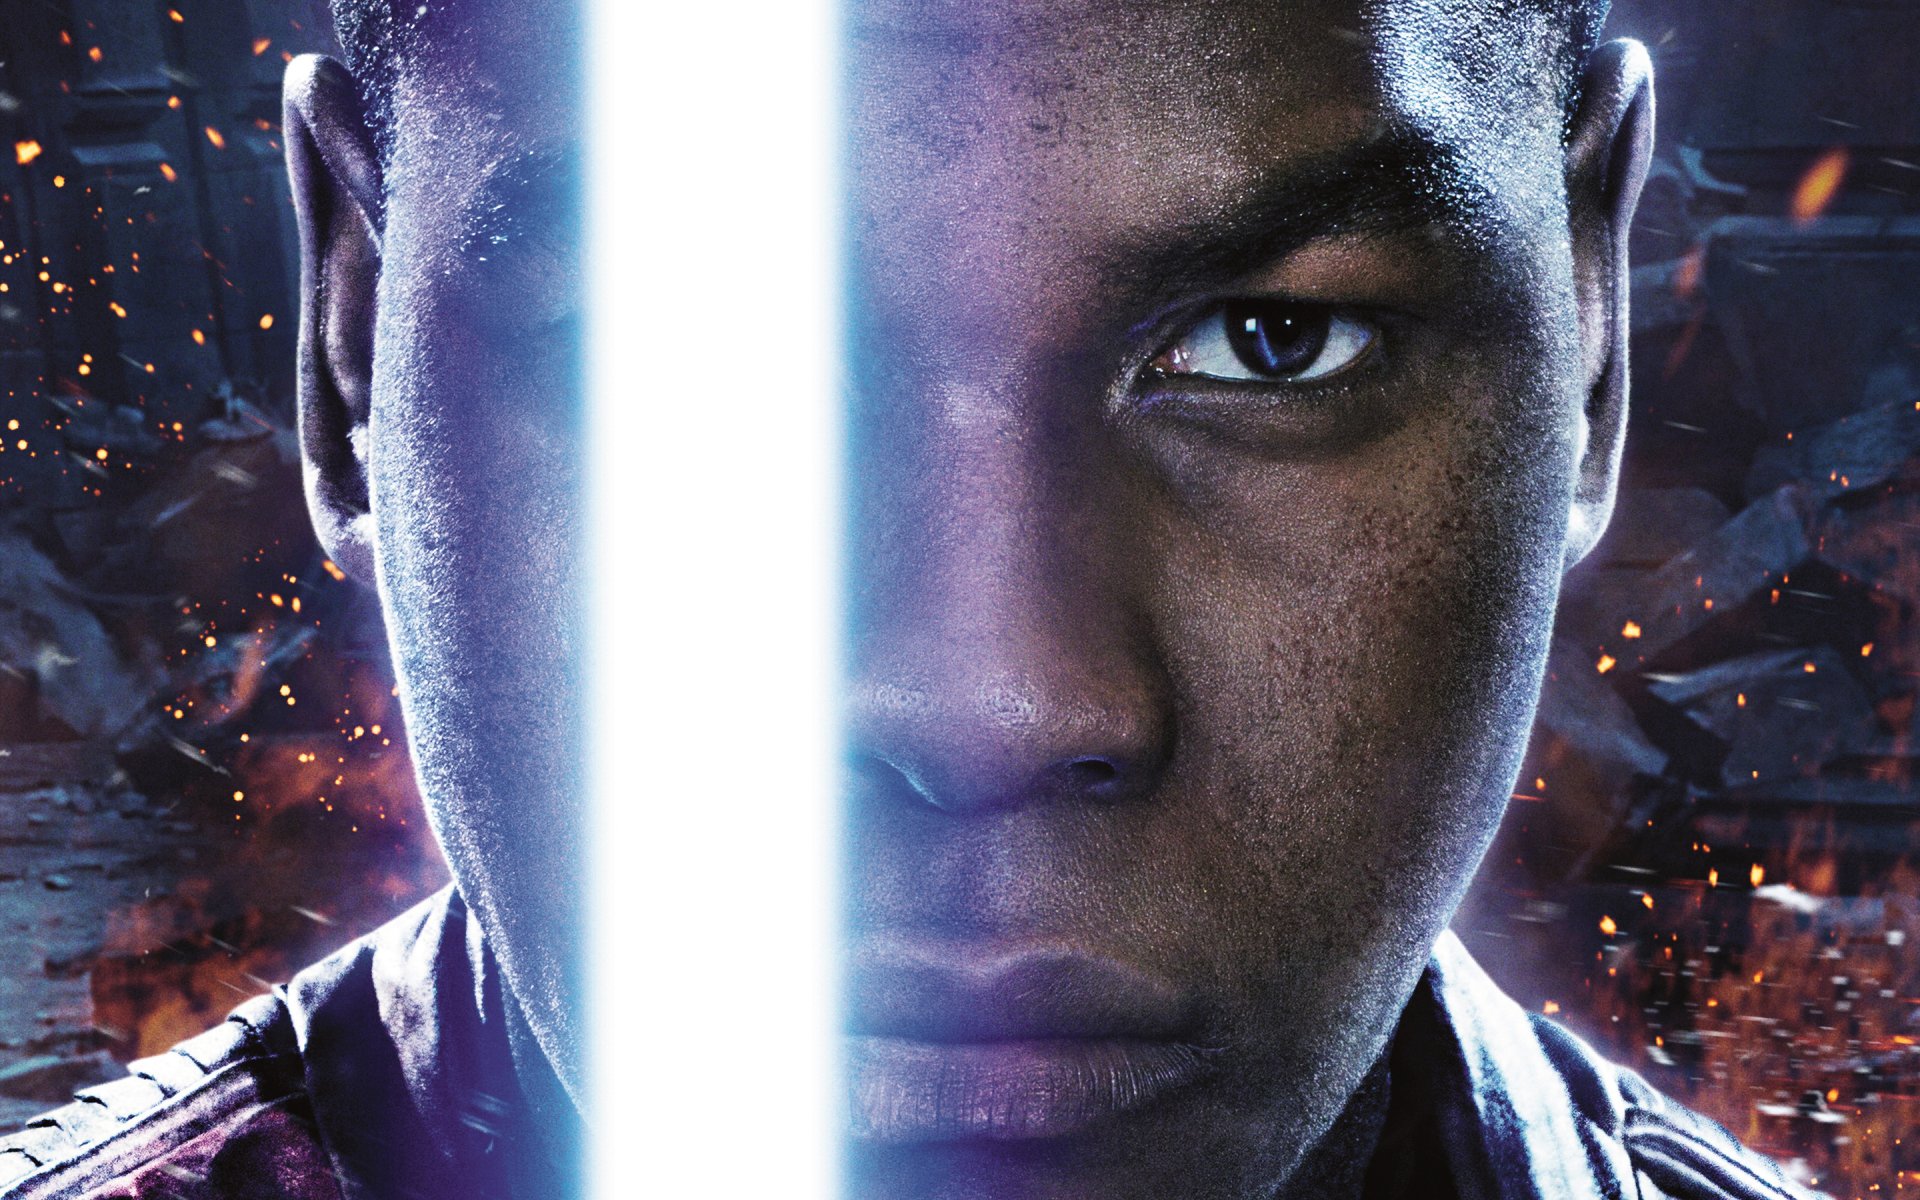 Star Wars Ep. VII: The Force Awakens download the new version for ios